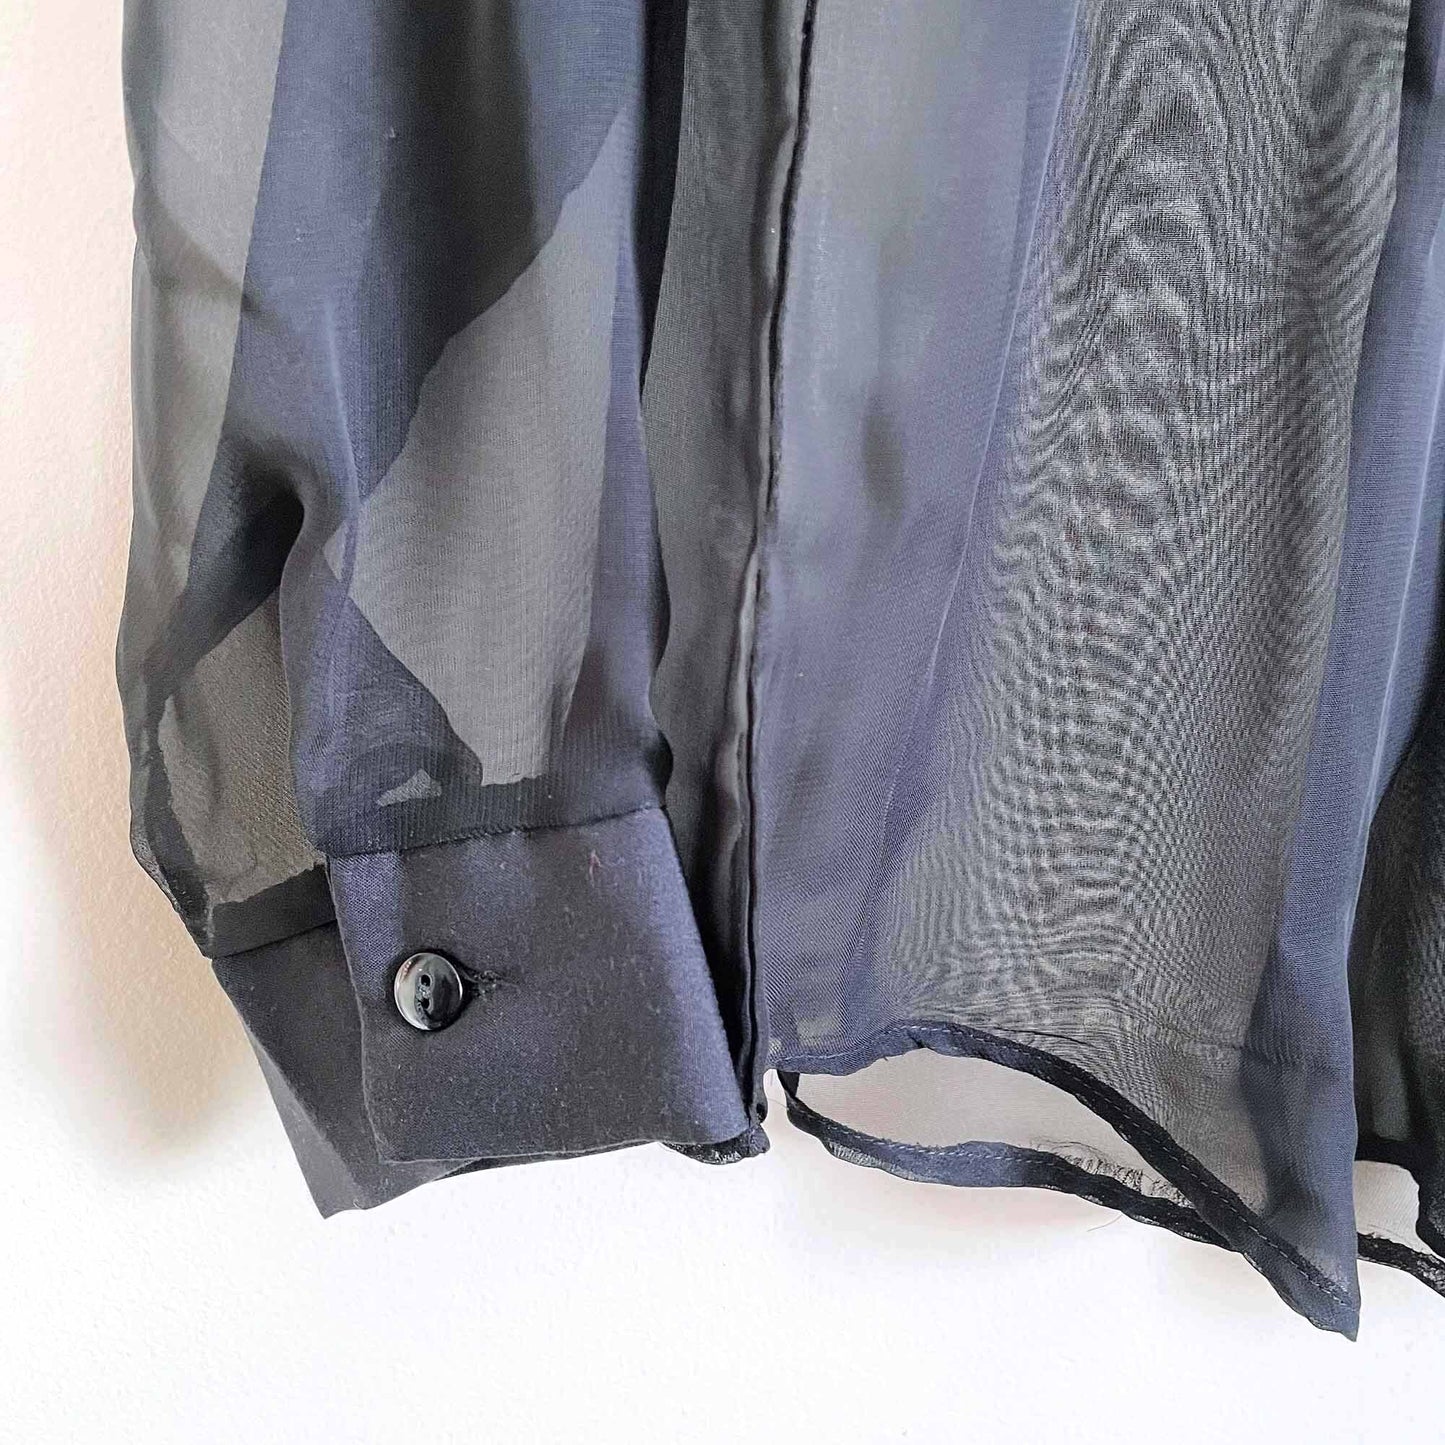 Vintage ICE sheer black 90's button down - size Large